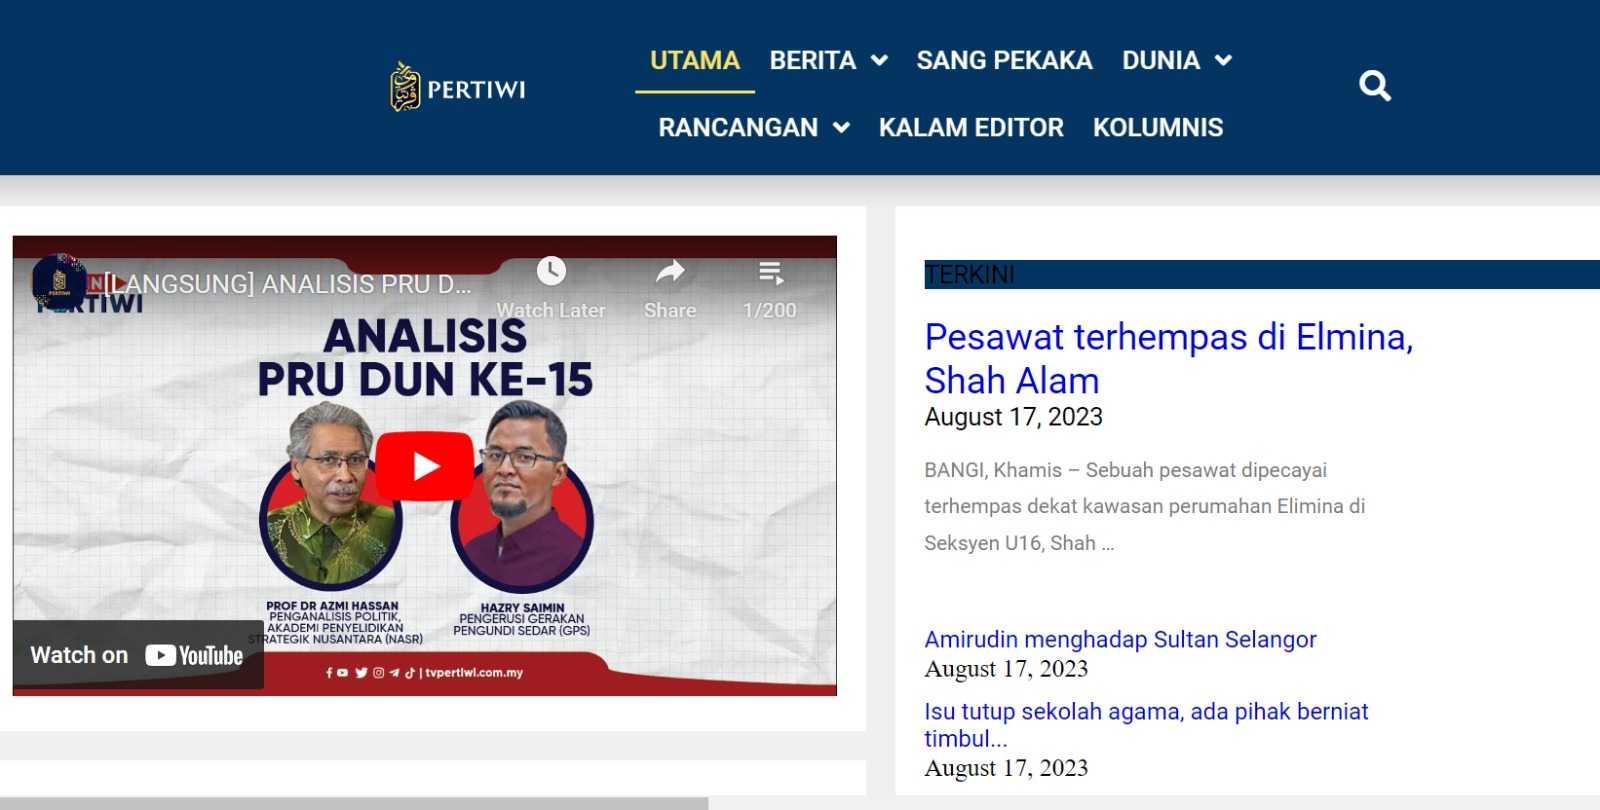 A screenshot of the TV Pertiwi website, which is accessible through use of the virtual private network to bypass MCMC's block.